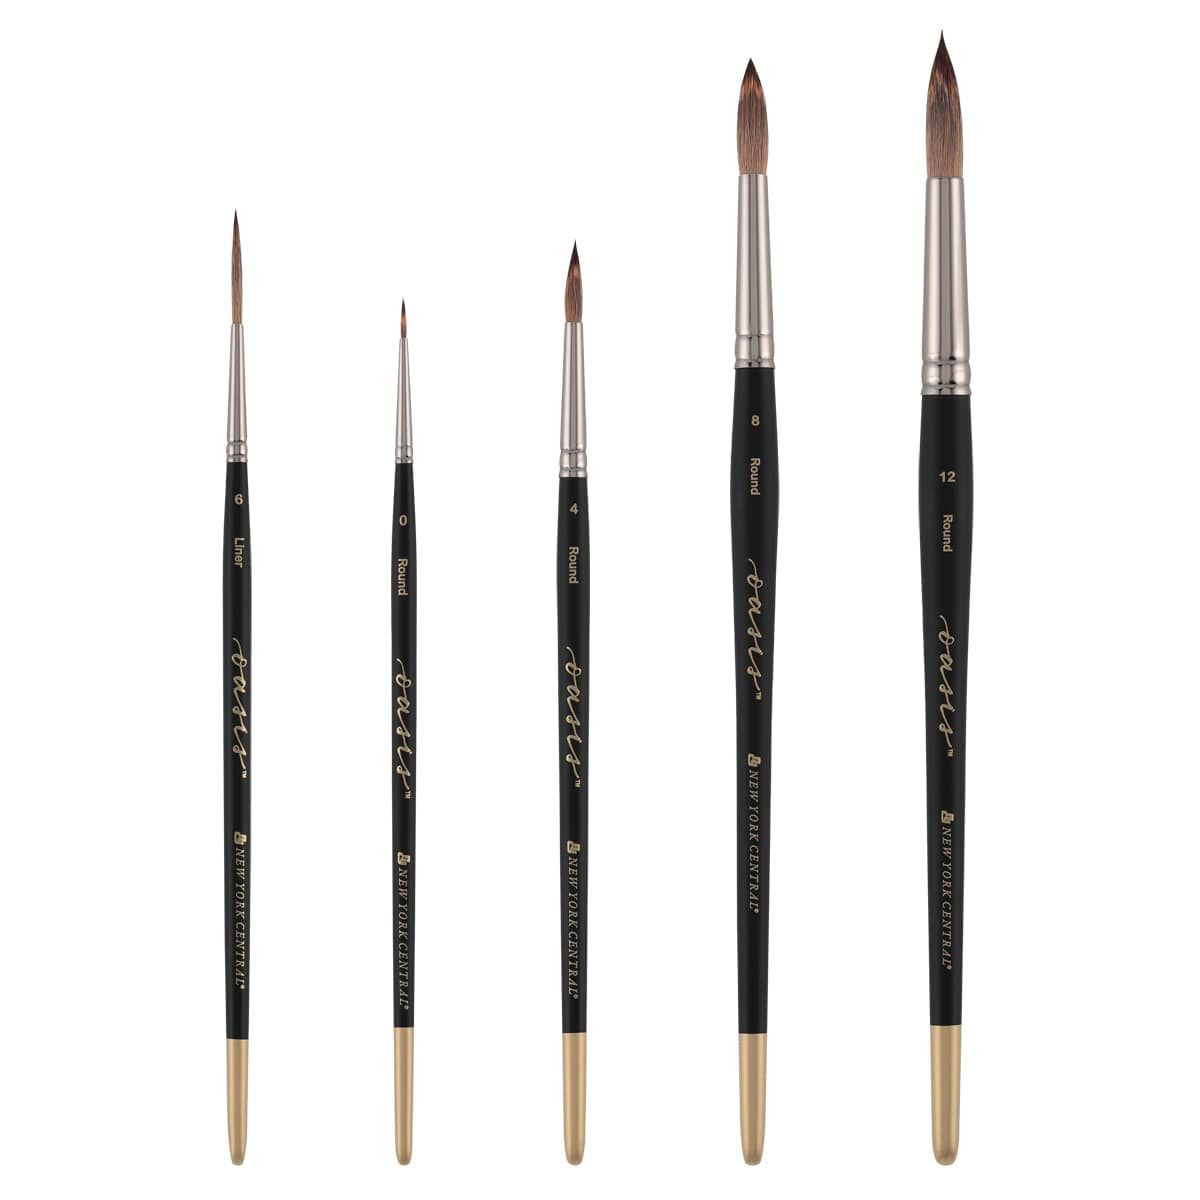 New York Central Oasis Synthetic Premium Brushes - Elite Professional Watercolor Brushes for Artists, Painting, Students, Studios, & More! - [Super